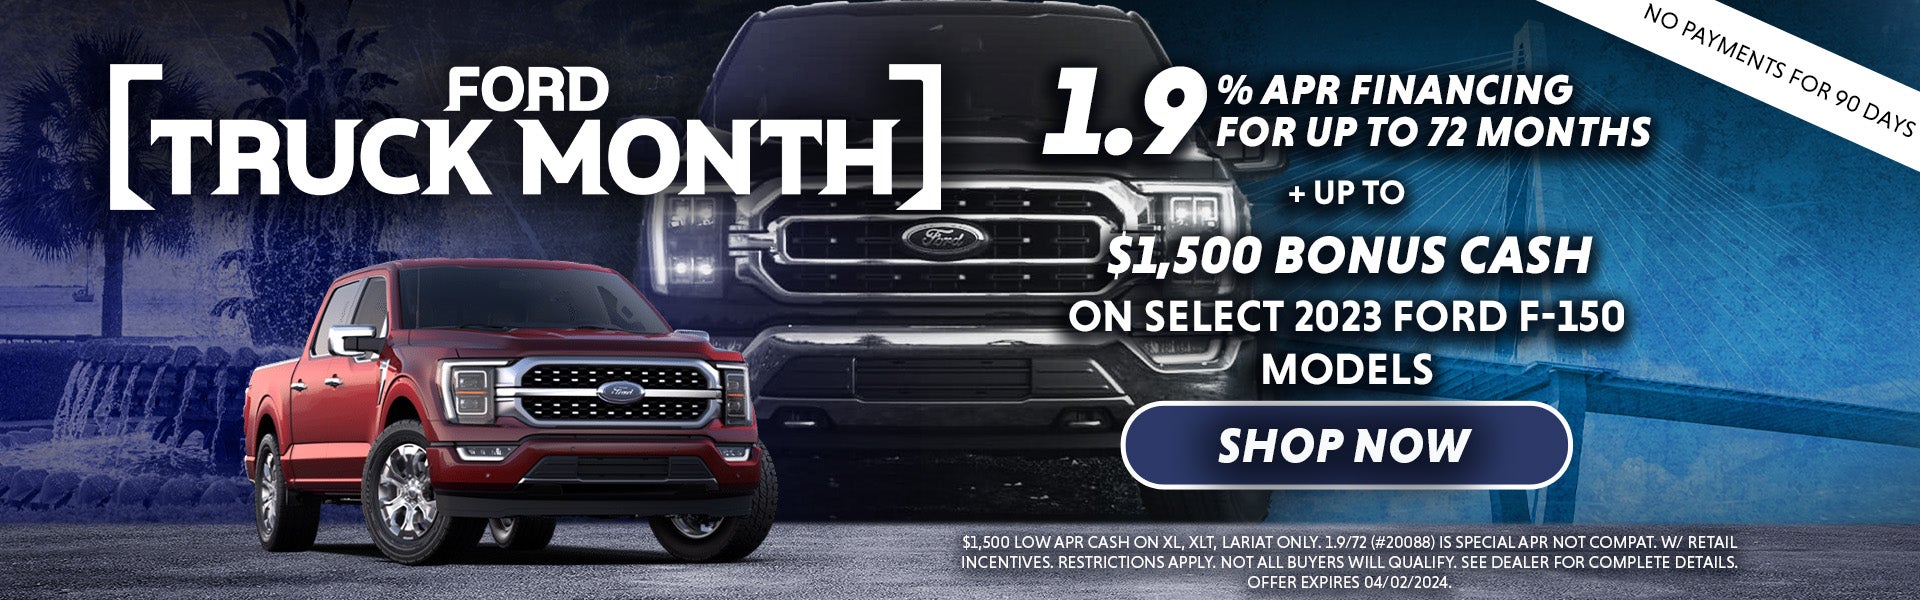 Save on Select F-150 Models today!